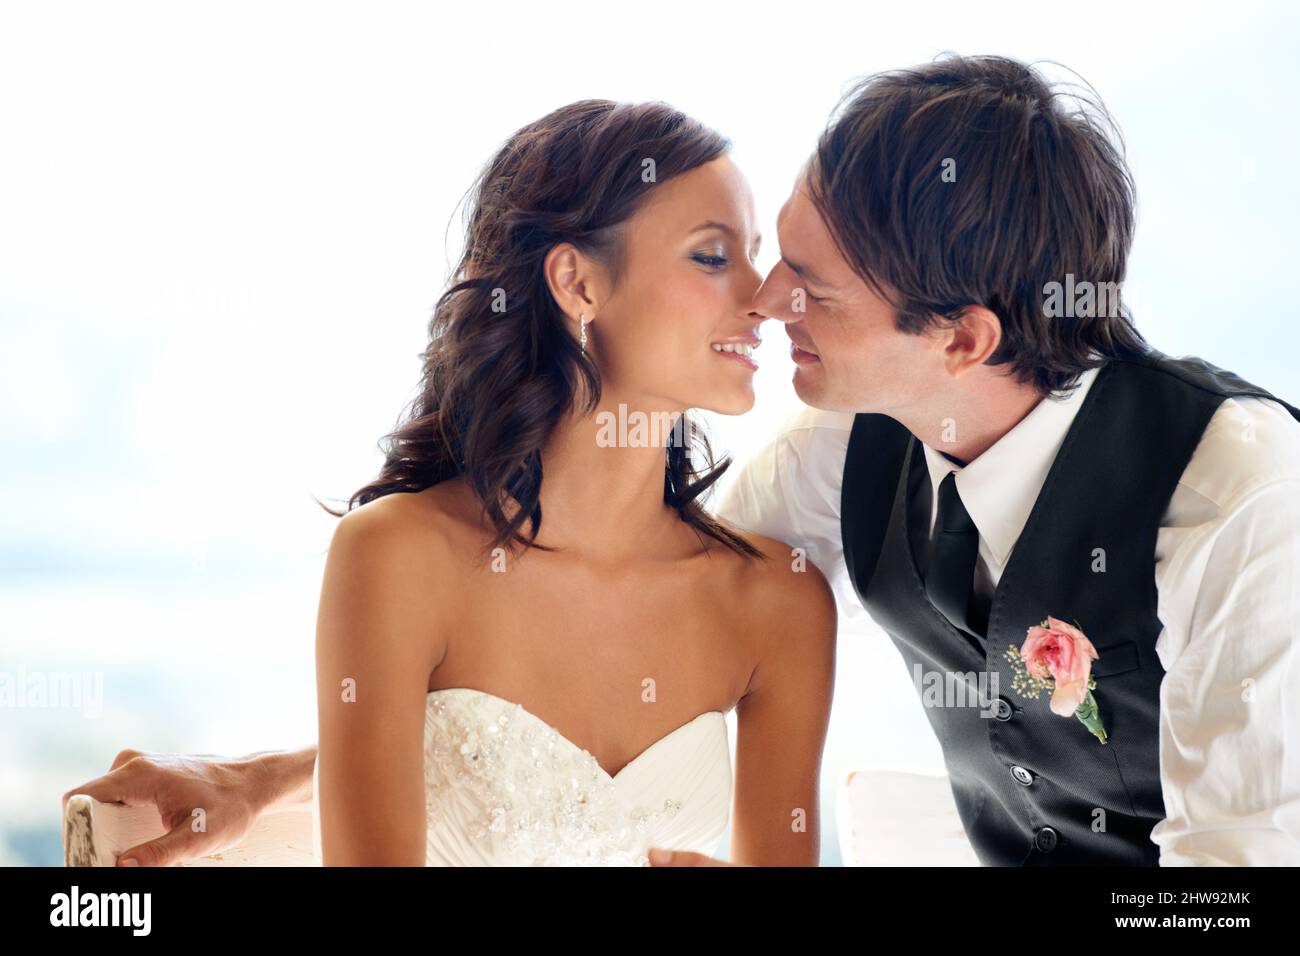 As in love as day 1. A happy newlywed couple kissing. Stock Photo